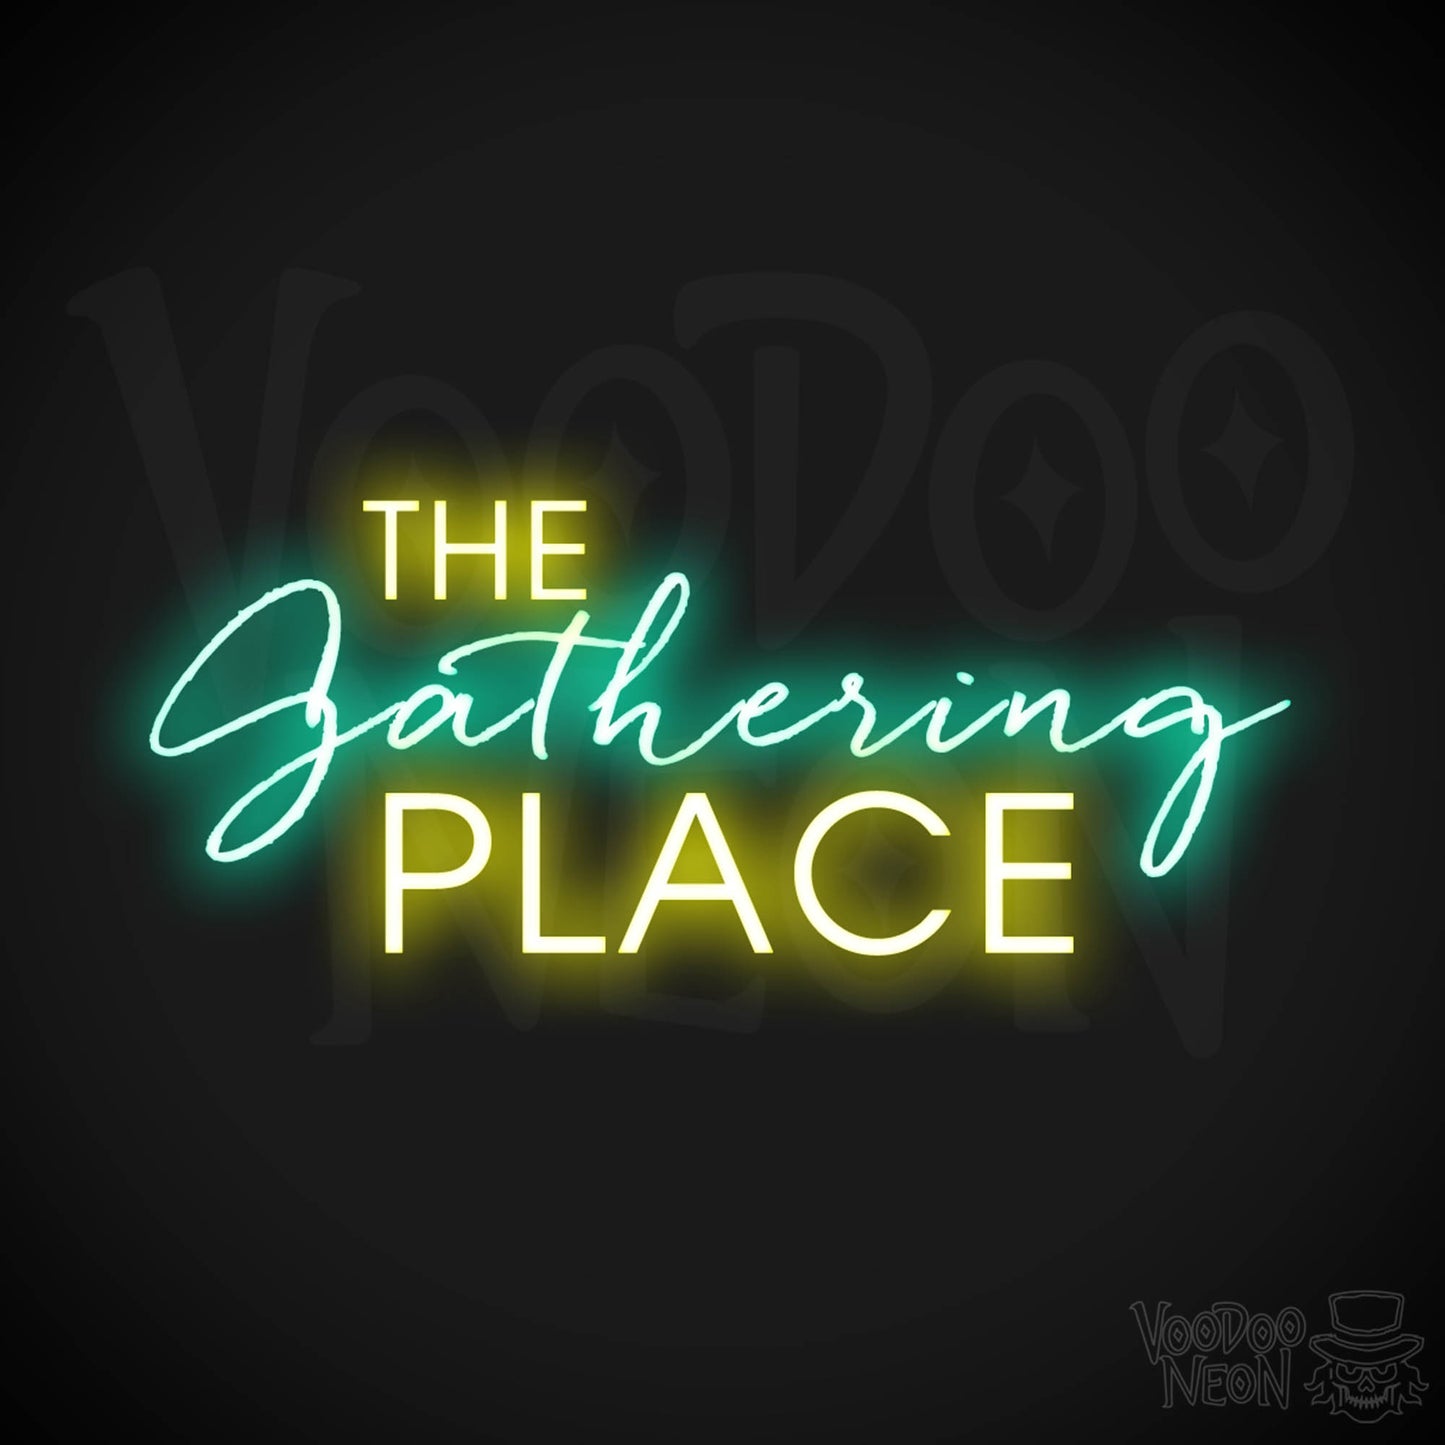 The Gathering Place Neon Sign - Neon The Gathering Place Sign - Wall Art - Color Multi-Color